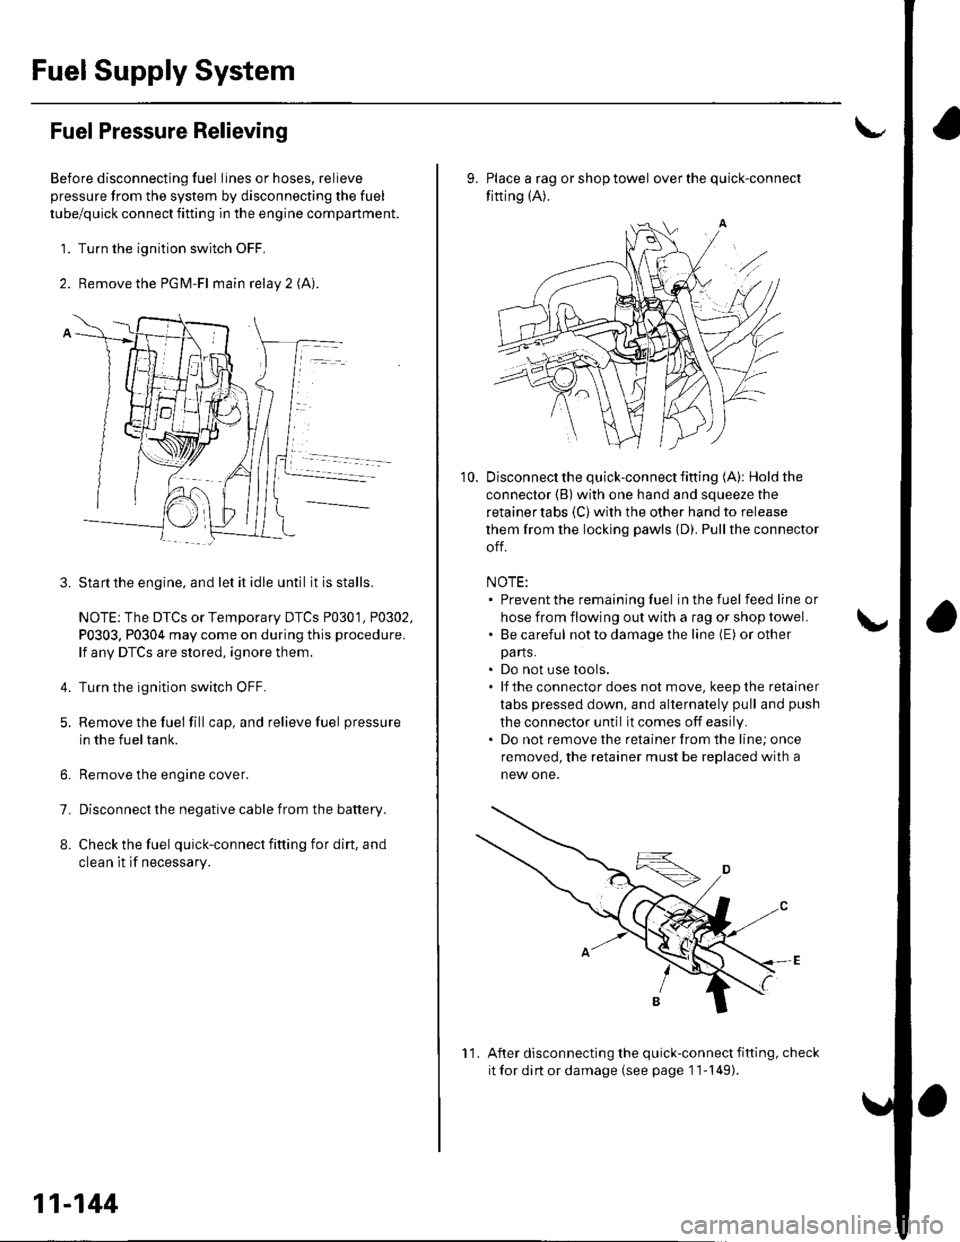 HONDA CIVIC 2003 7.G Workshop Manual FuelSupply System
Fuel Pressure Relieving
Before disconnecting fuel lines or hoses, relieve
pressure from the system by disconnecting the fuel
tube/quick connect fitting in the engine compartment.
1. 